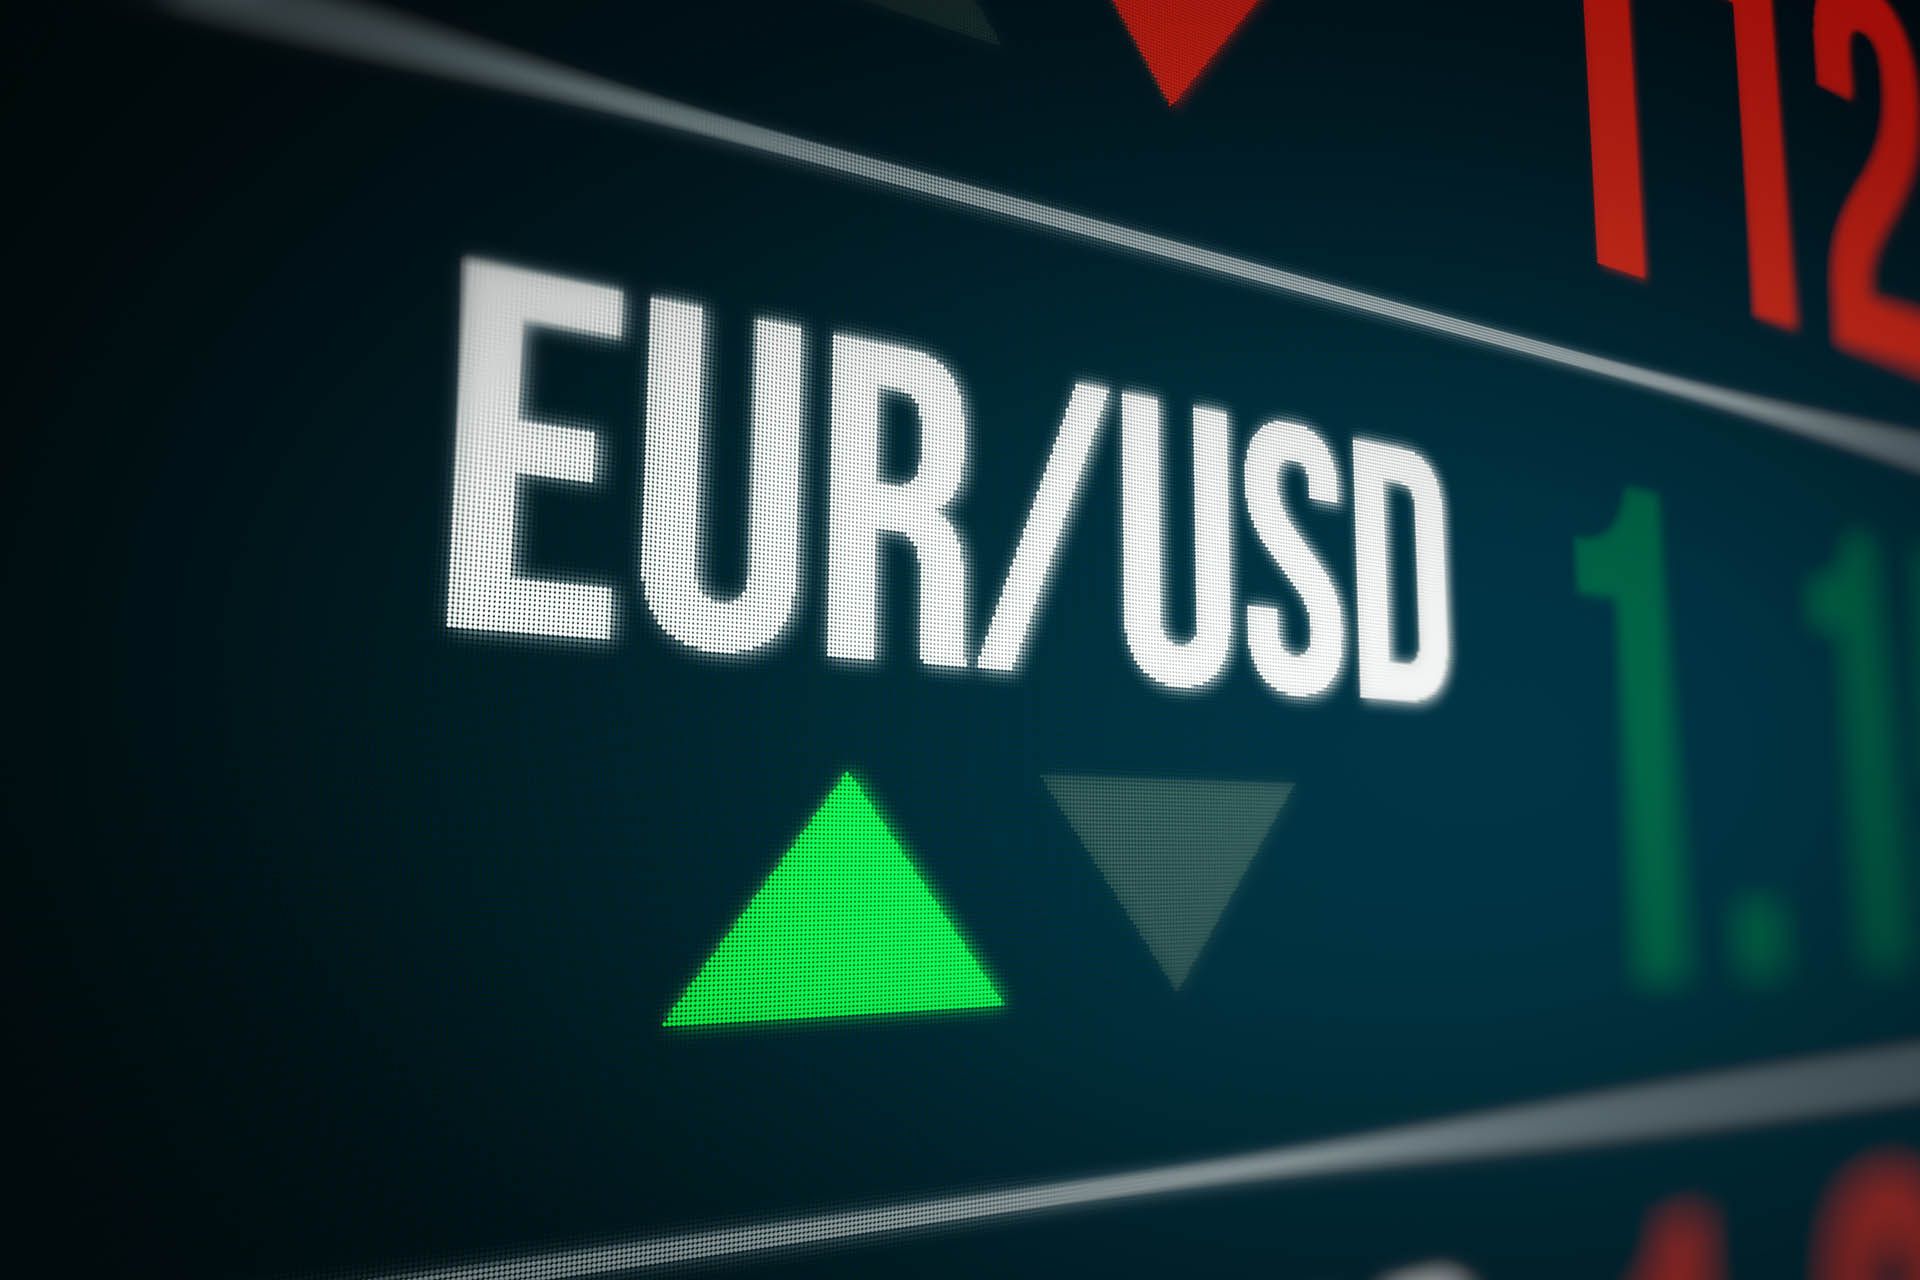 EUR to USD exchange rate